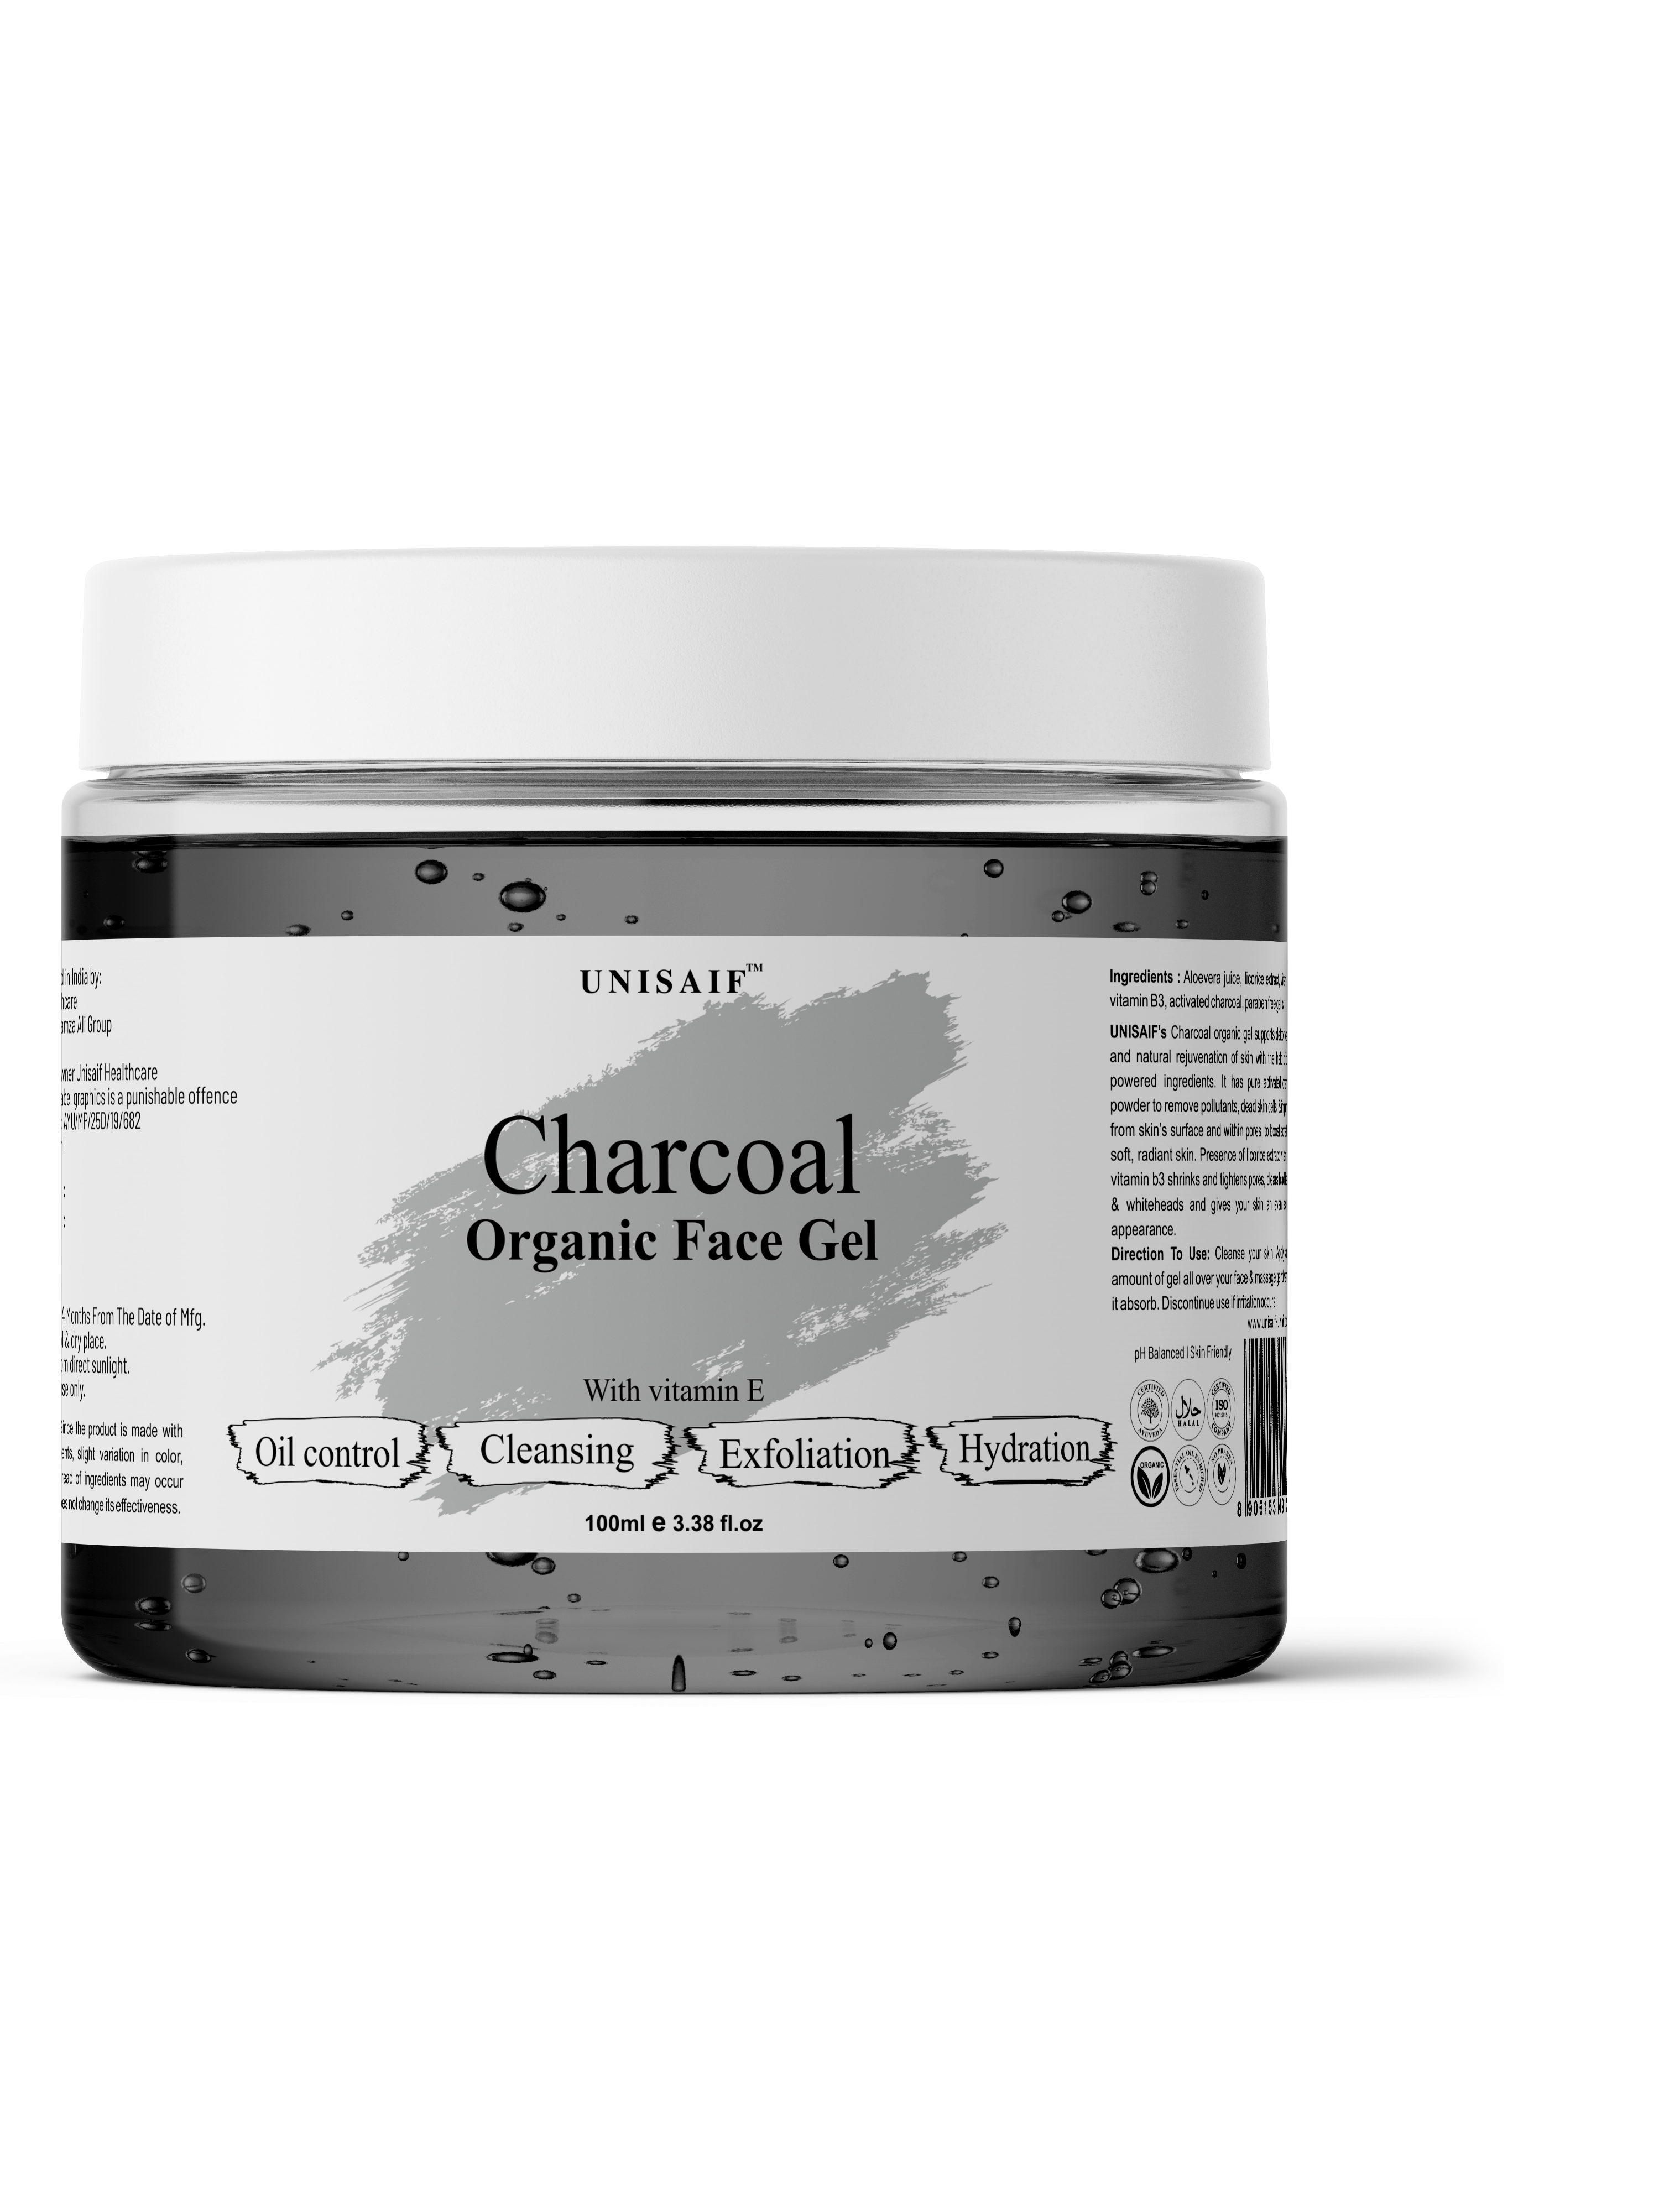 Charcoal Organic Facial Gel (100g) With Vitamin E | Oil Control| Cleansing| Exfoliation| Hydration| NO PARABEN